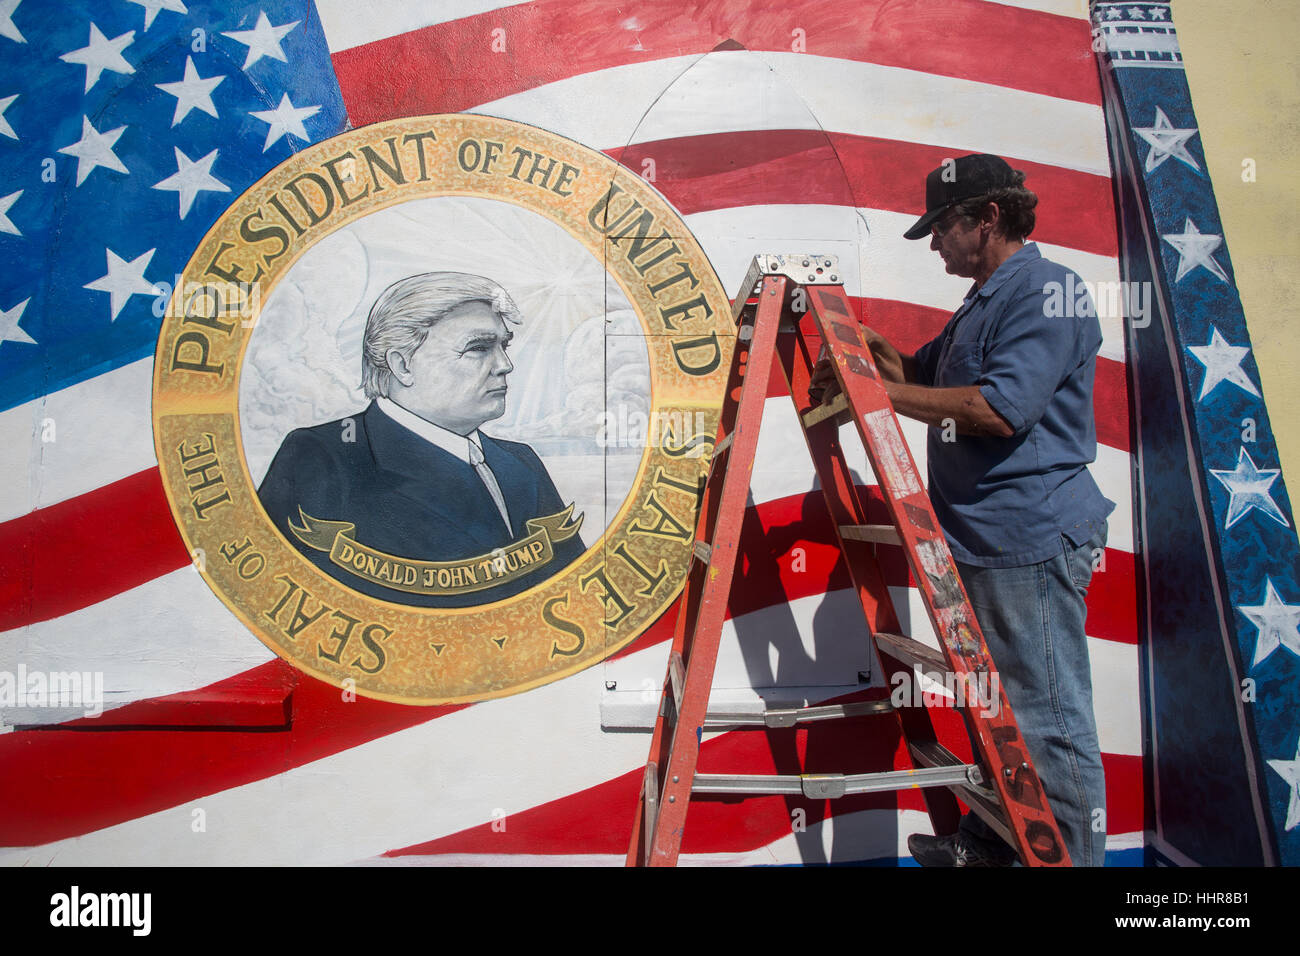 Leo Stack, a local artist and U.S. army veteran in Ft. Myers, FL paints a portrait of the incoming president, Donald J. Trump. Stock Photo